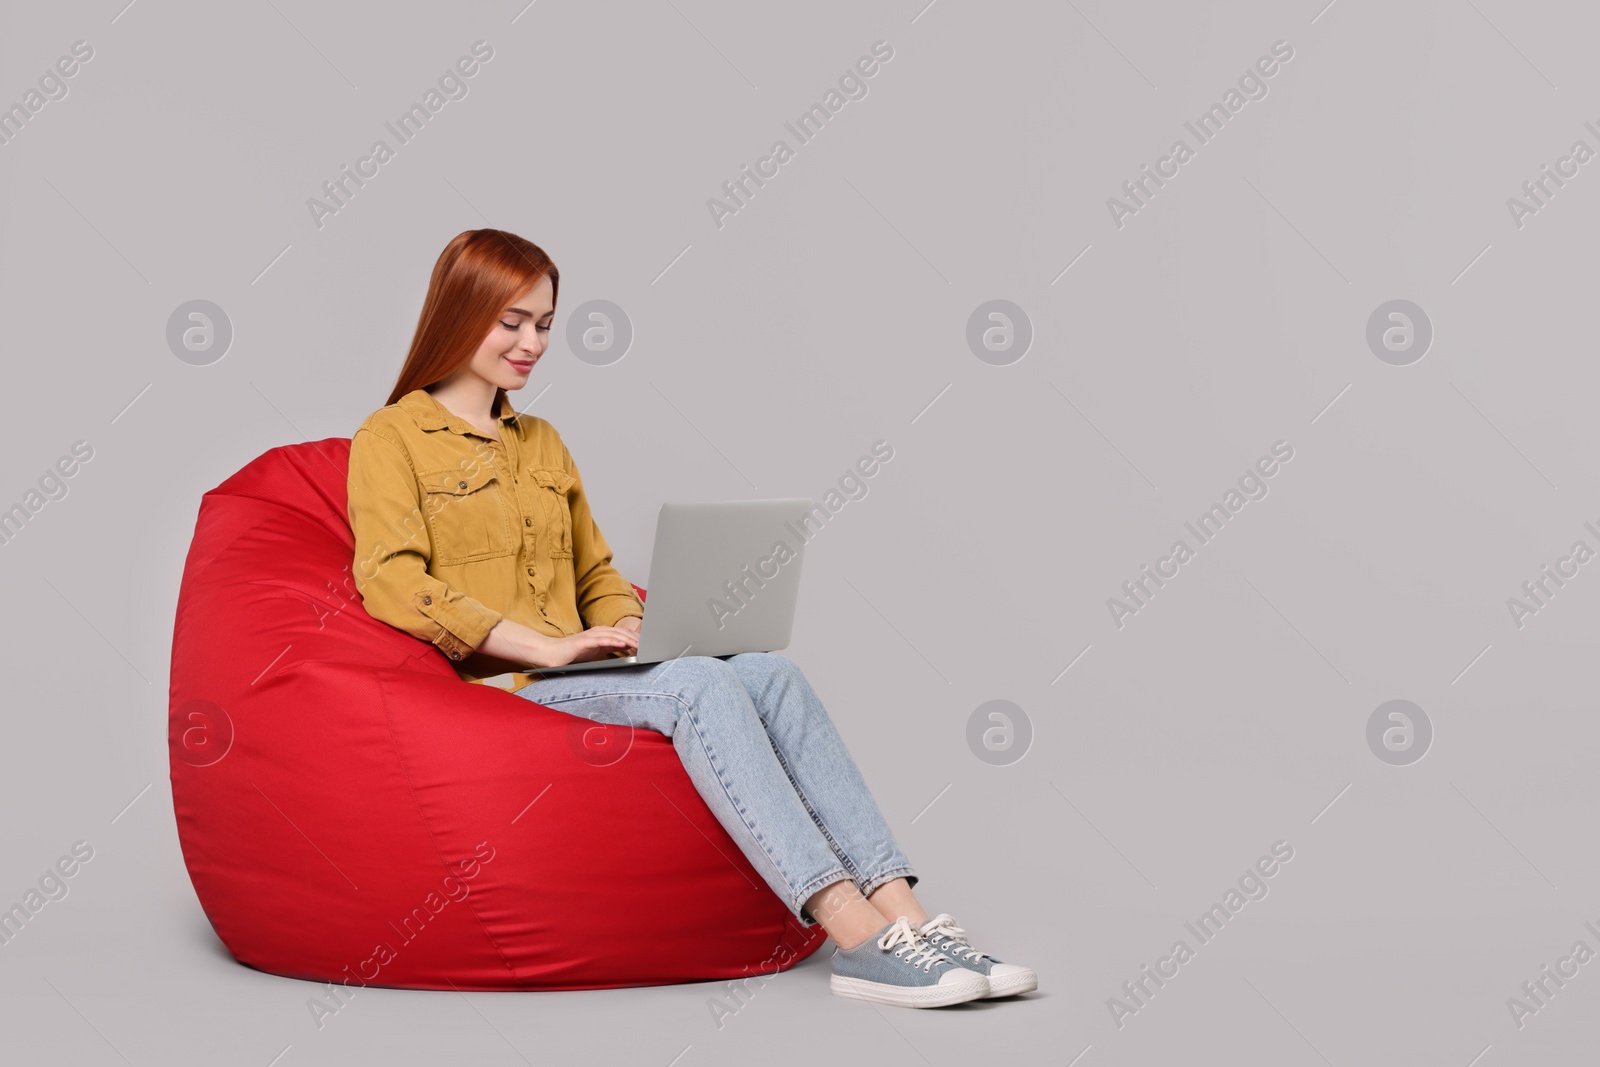 Photo of Smiling young woman working with laptop on beanbag chair against grey background, space for text